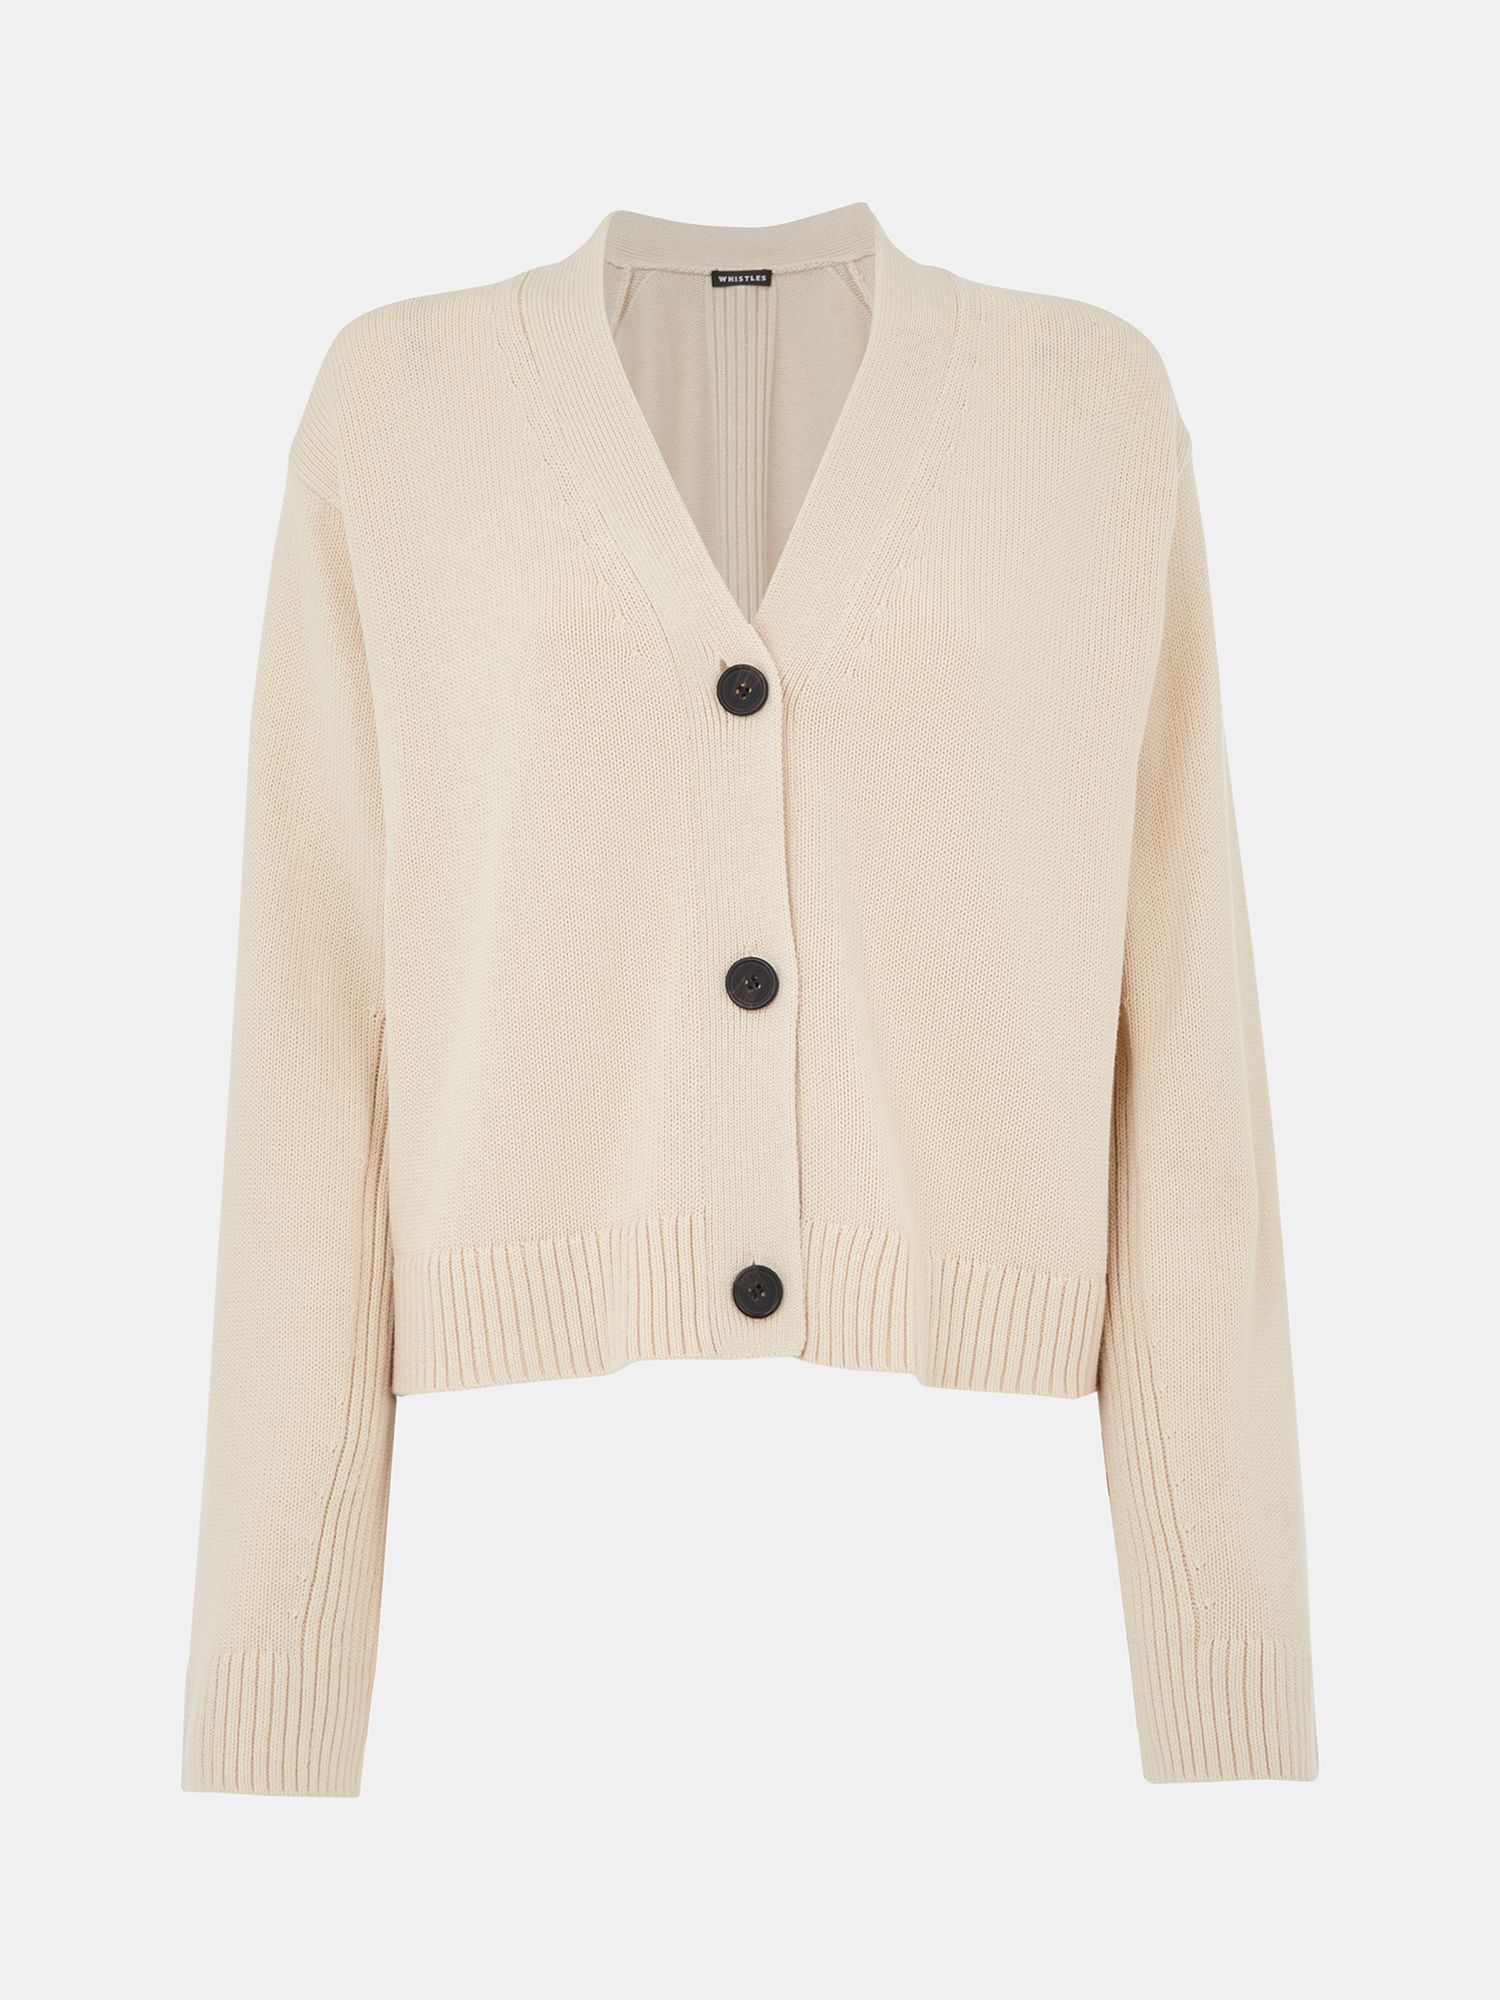 Whistles Nina Button Front Cardigan, Ivory, XS